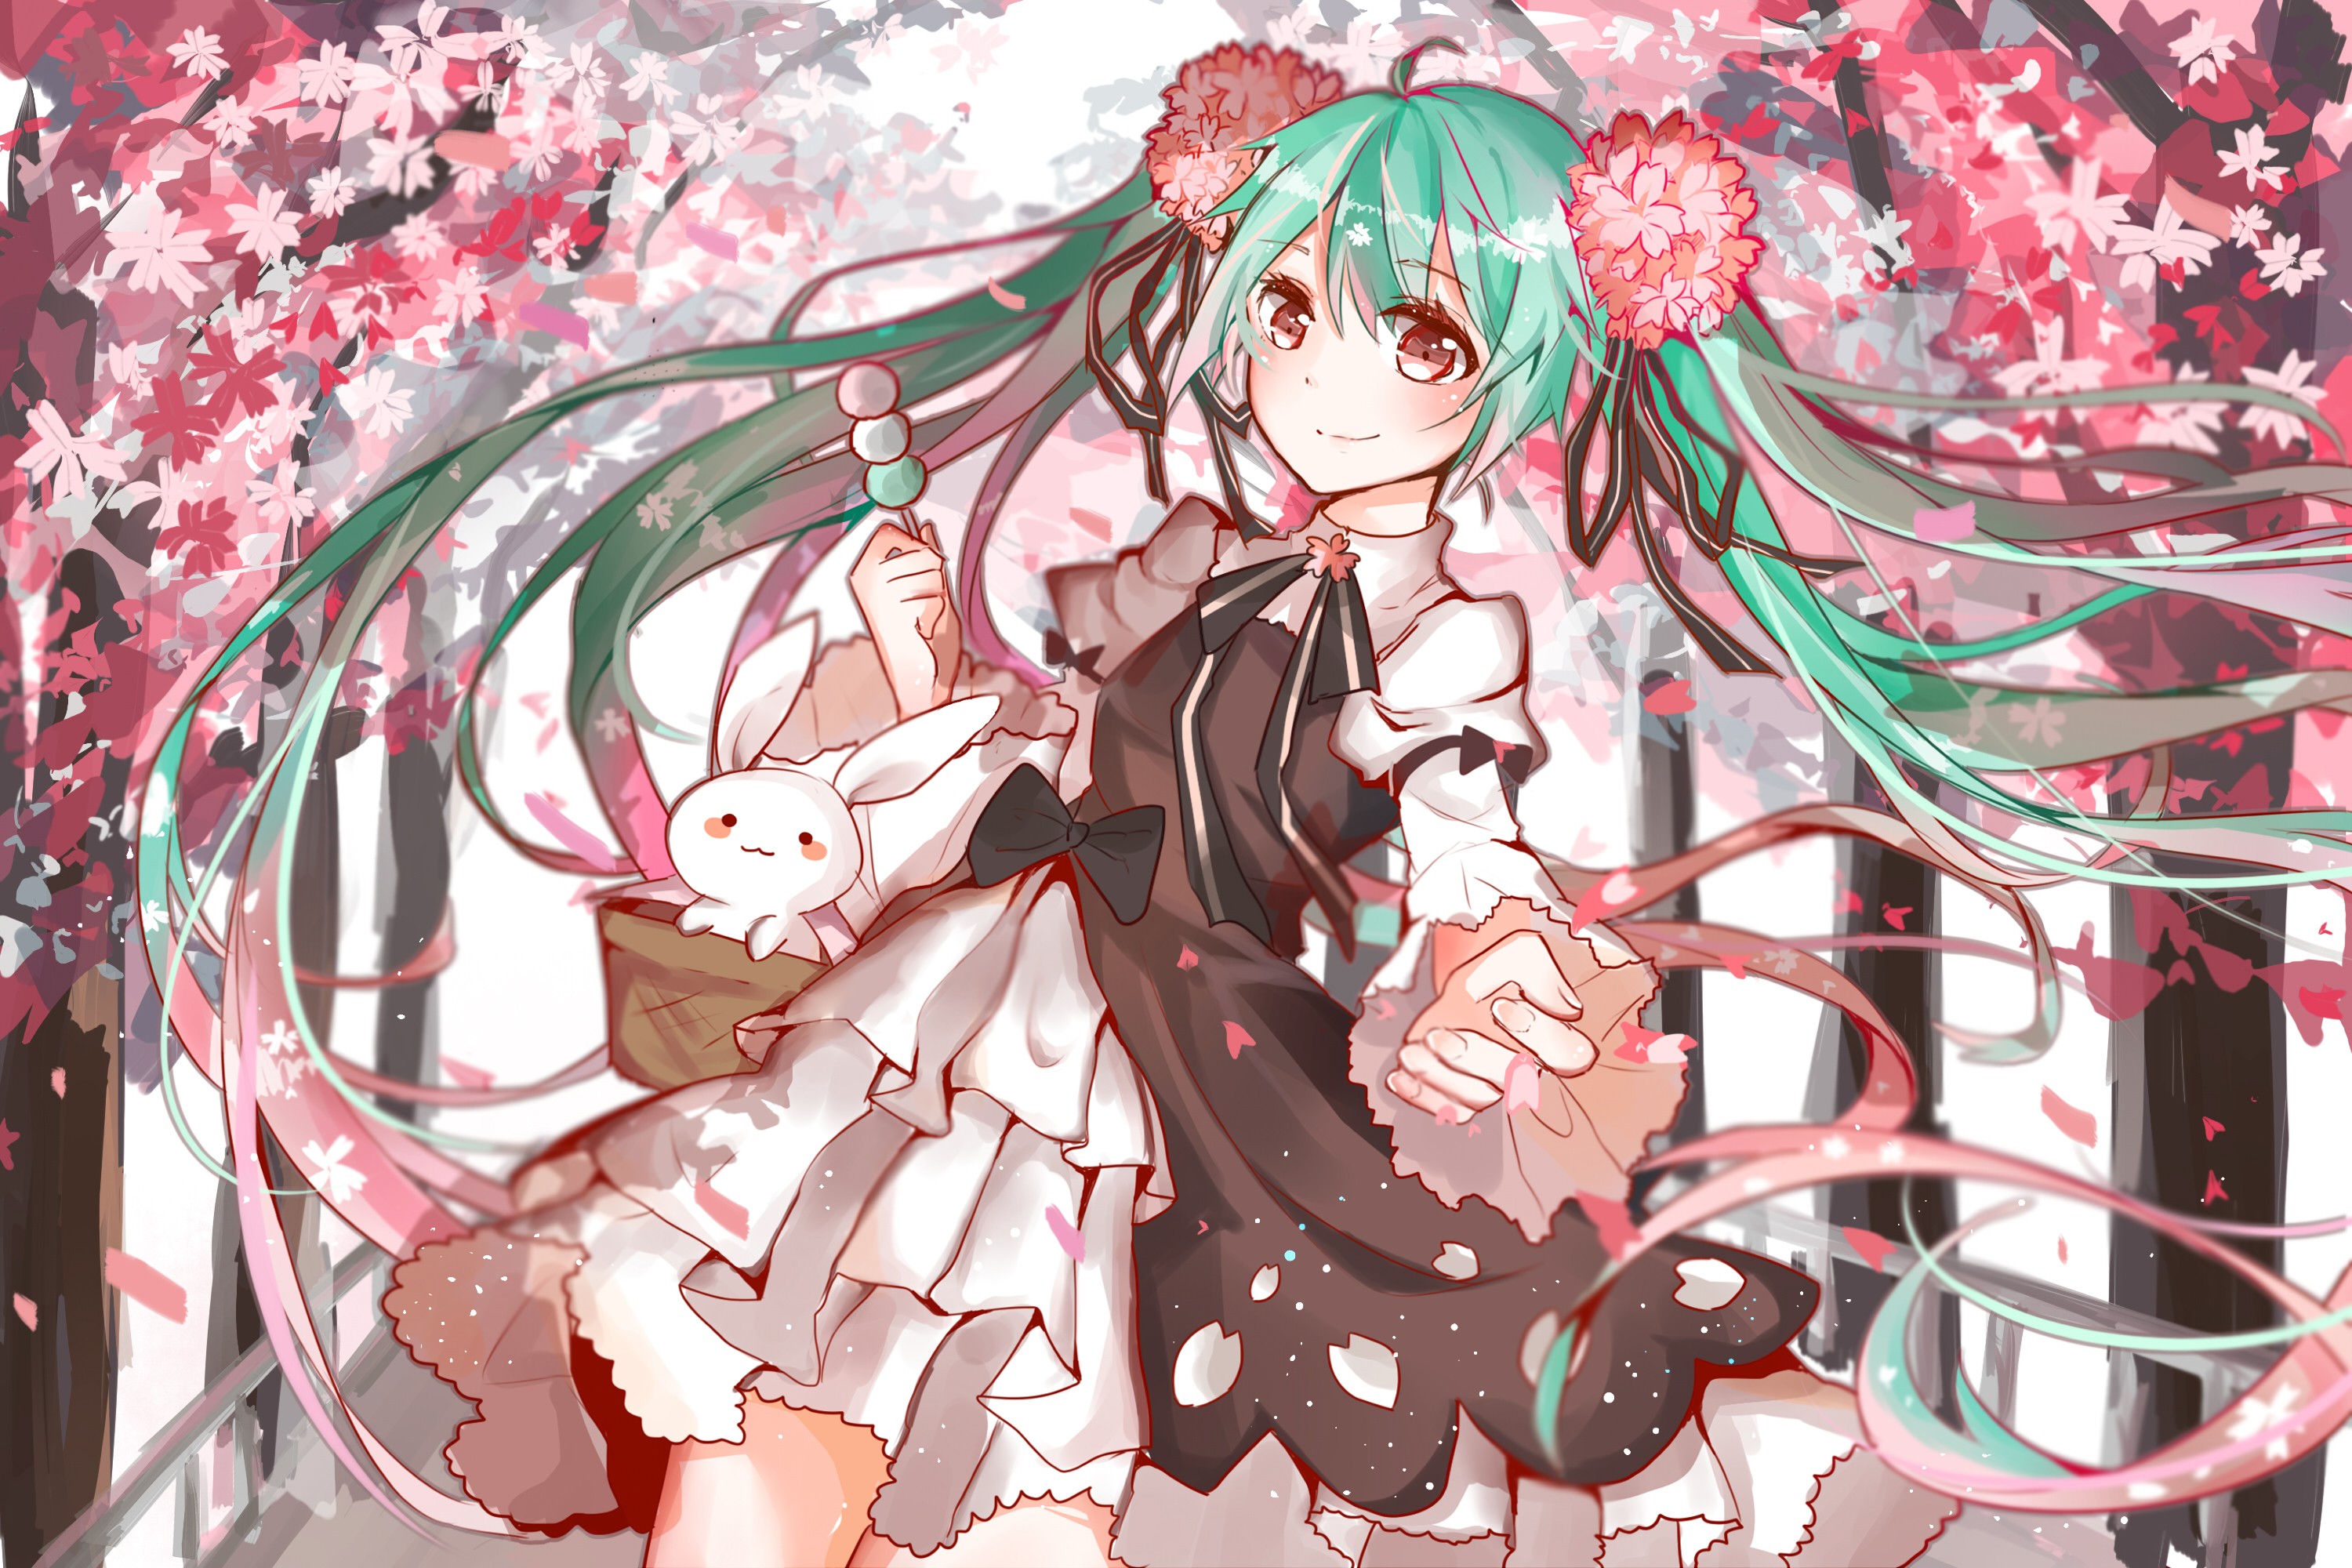 Anime 3000x2000 Vocaloid Hatsune Miku long hair twintails flower in hair ribbon dress cherry trees petals rabbits anime girls anime cherry blossom smiling green hair